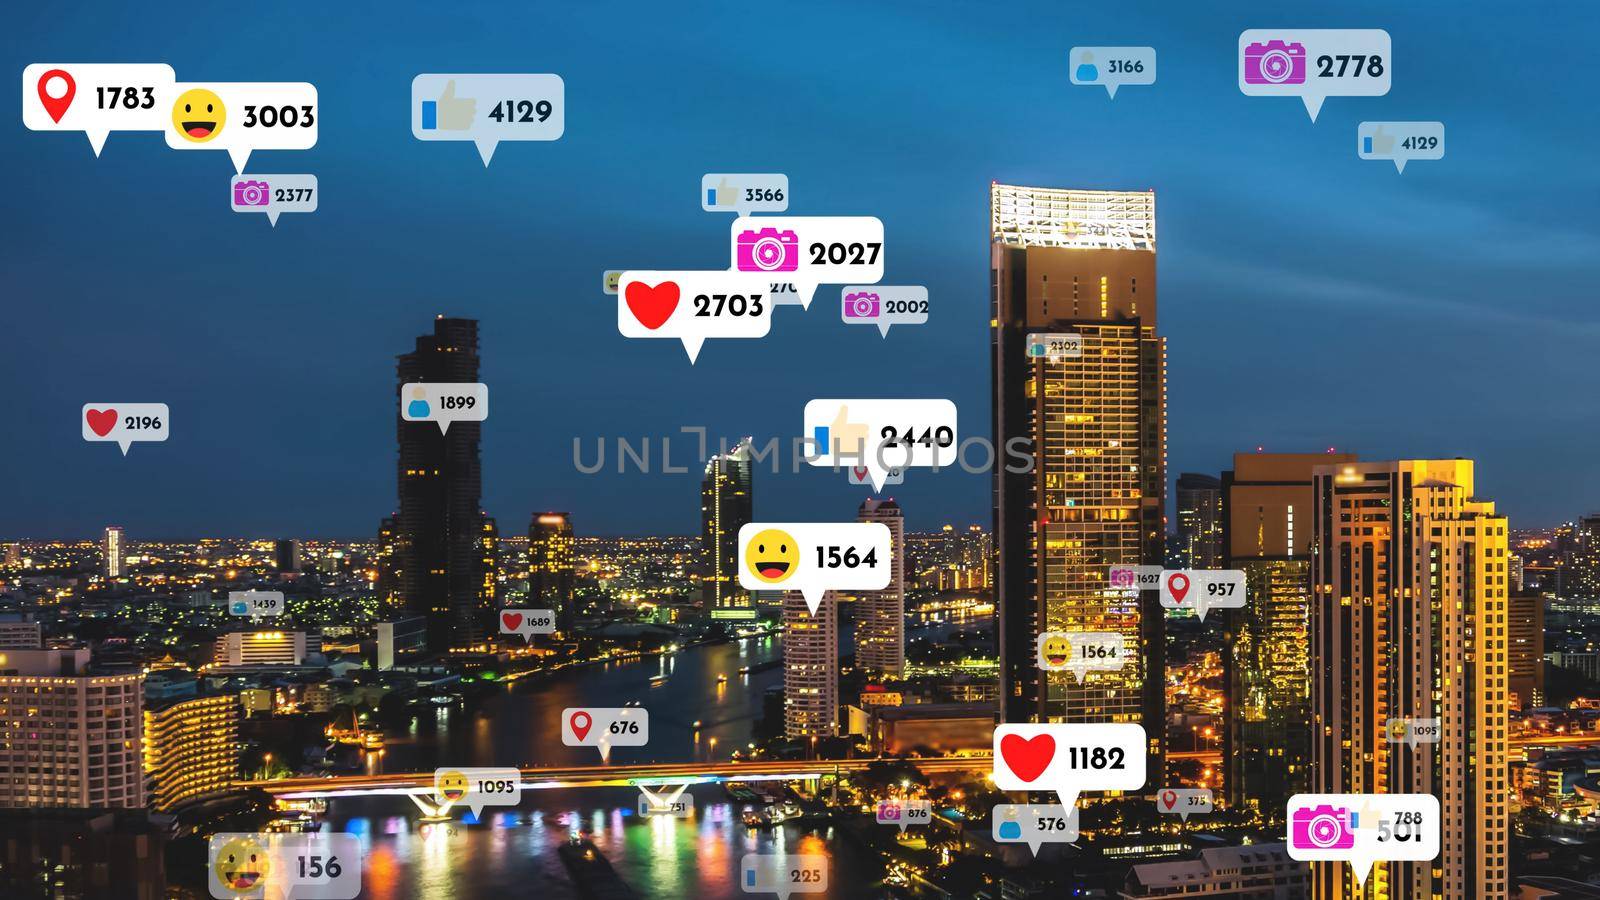 Social media icons fly over city downtown showing people reciprocity connection by biancoblue